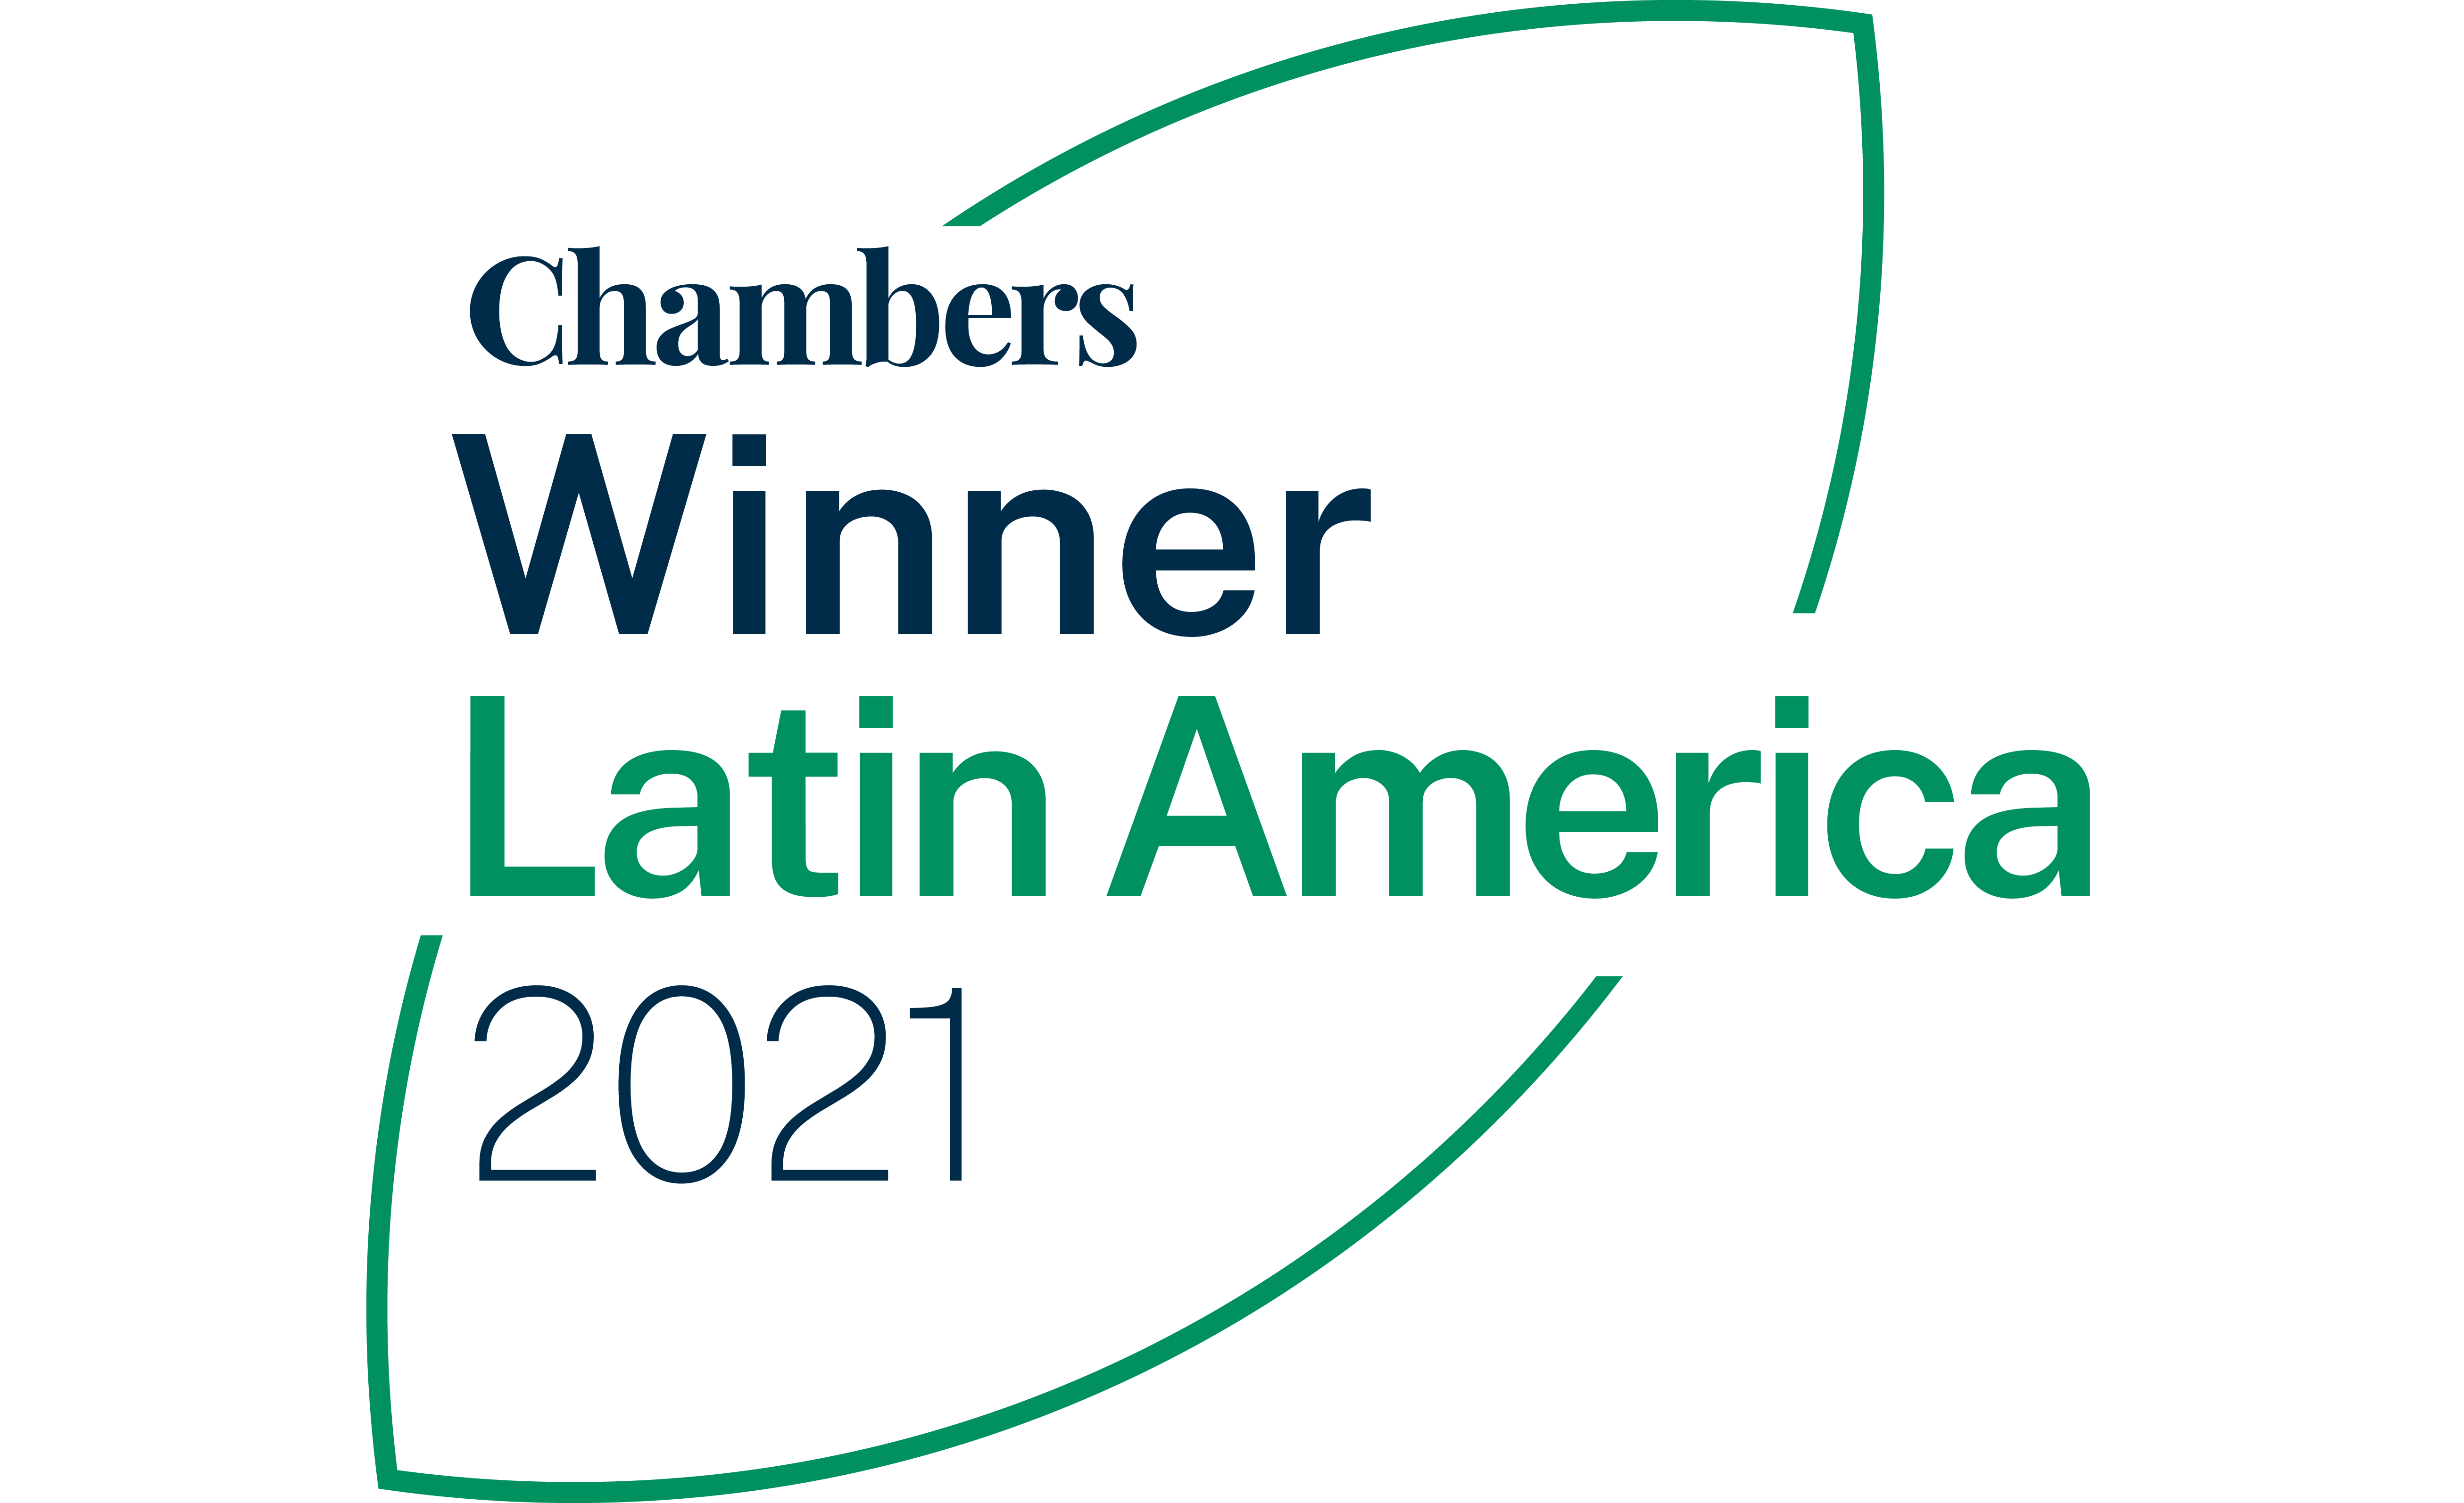 LATIN AMERICAN FIRM OF THE YEAR 2021, 2018